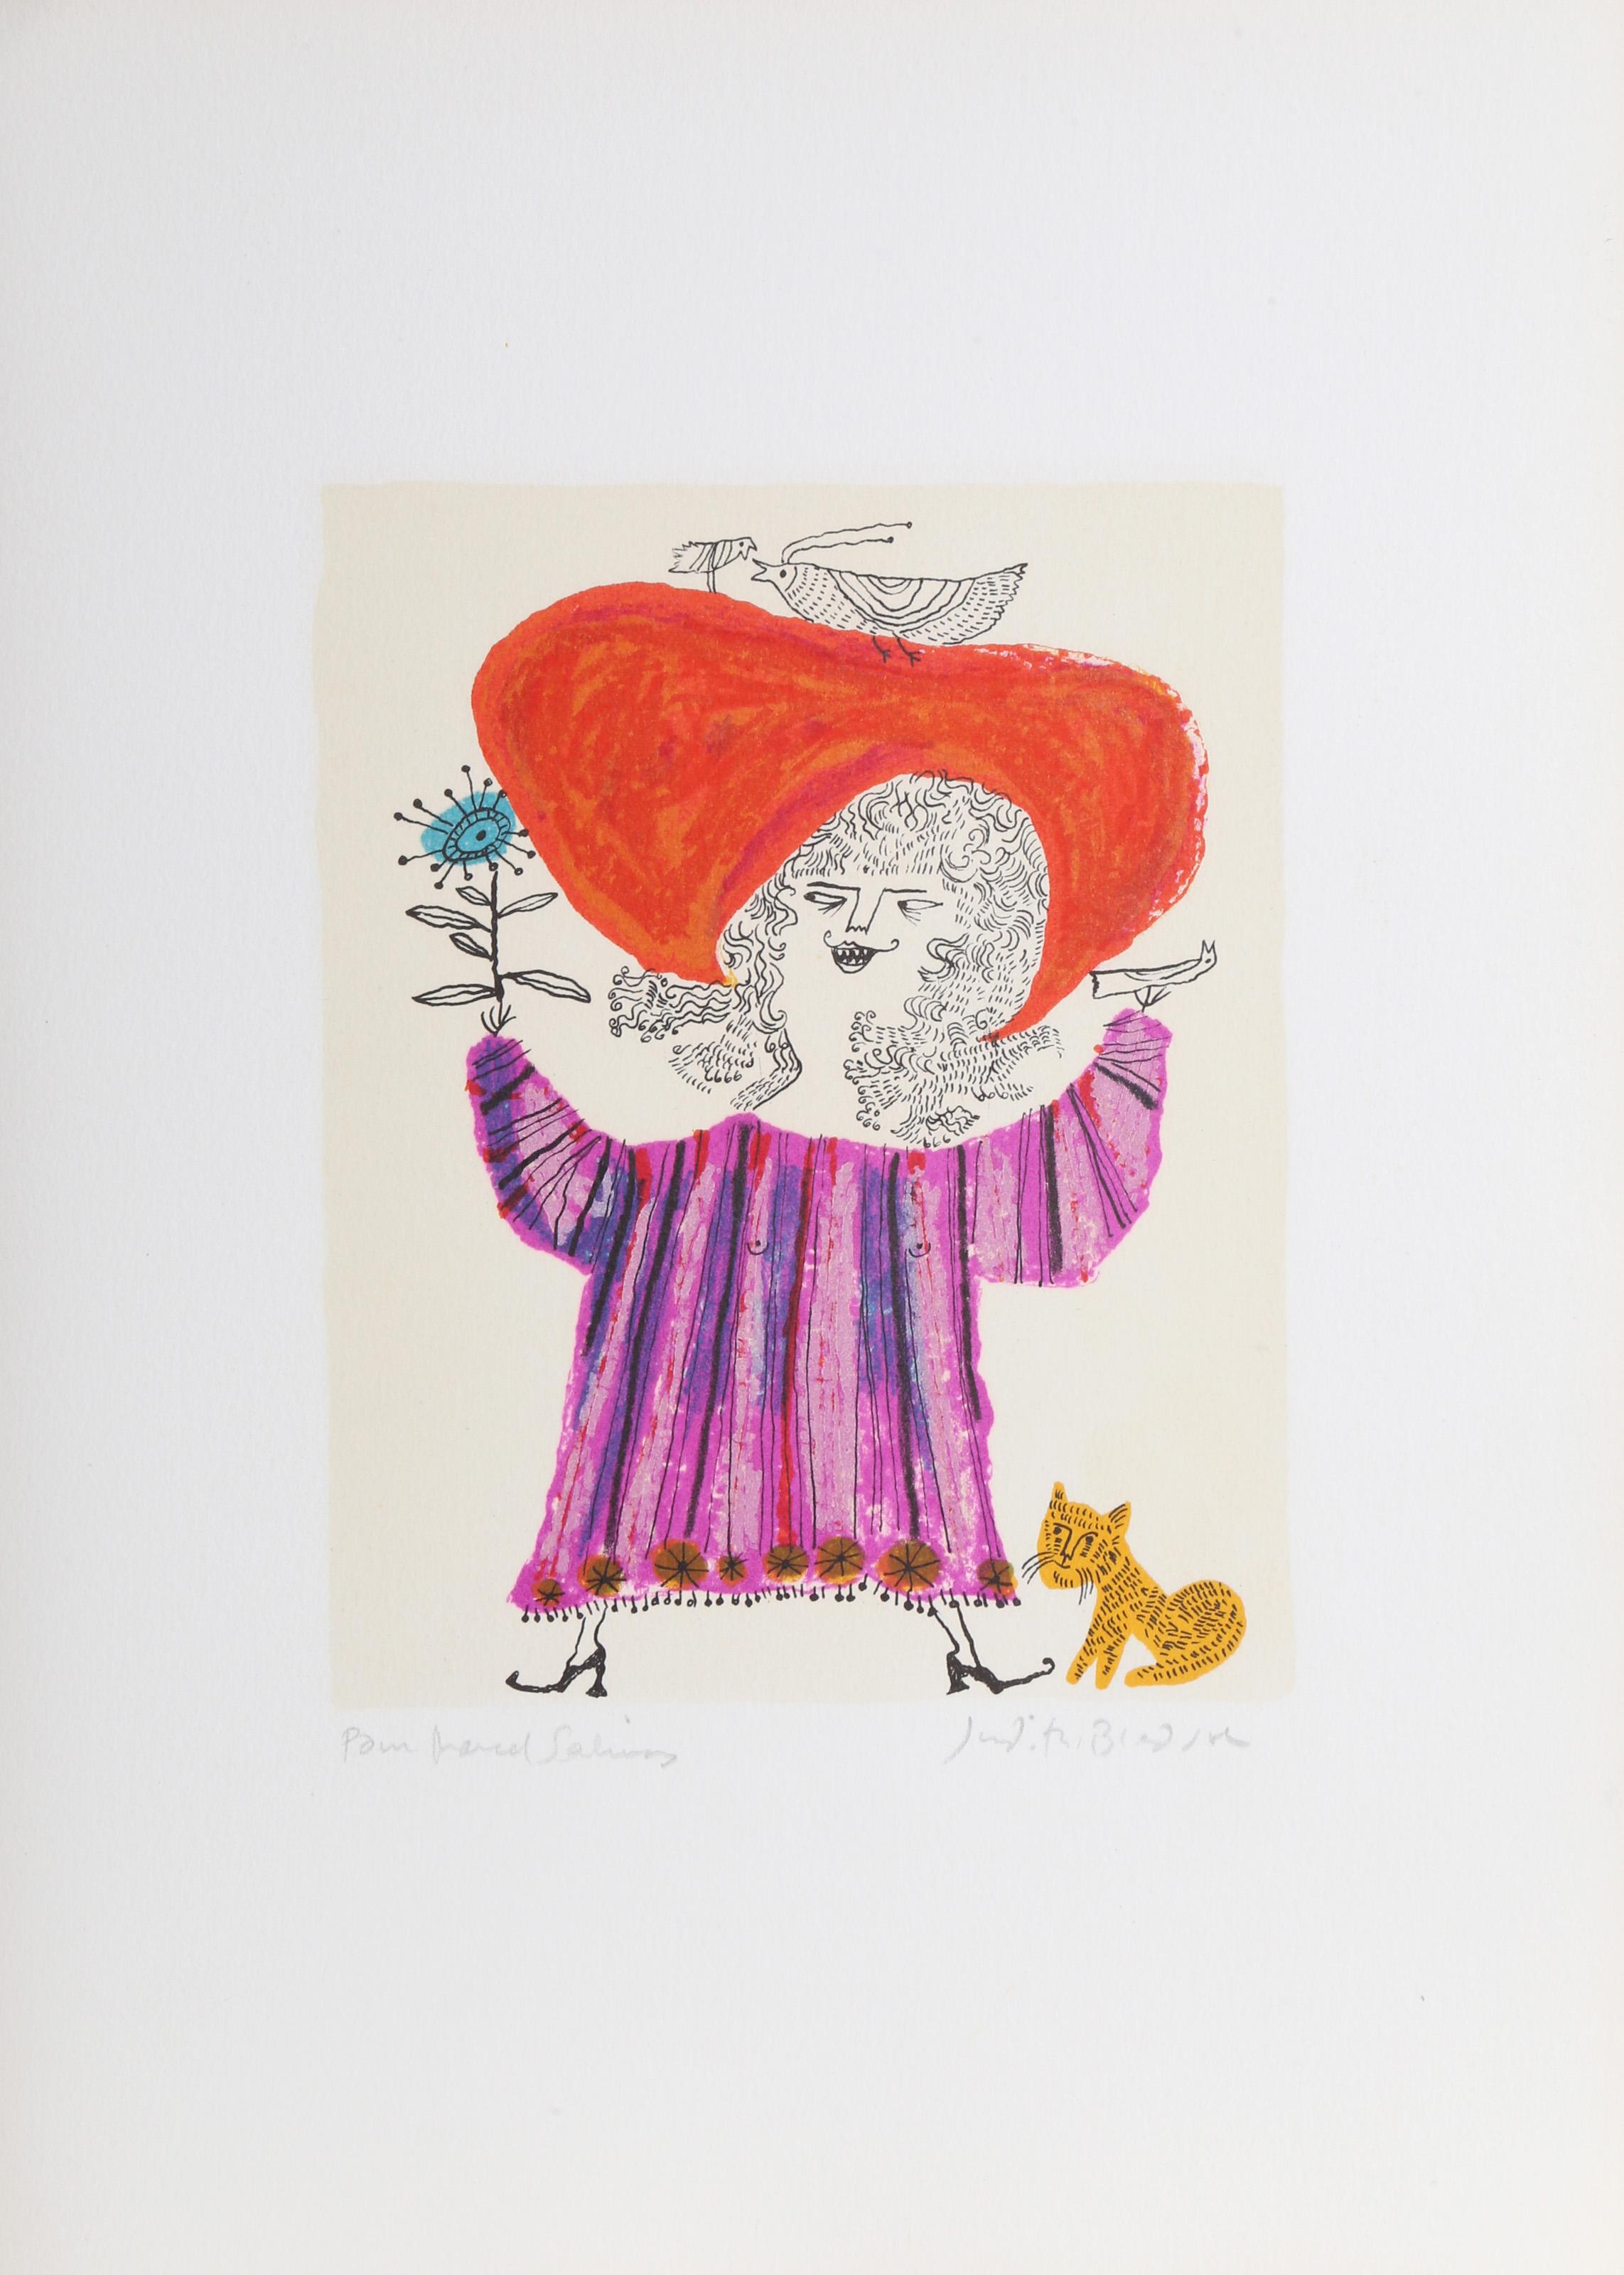 Judith Bledsoe, American (1938 - 2013) -  Petite Portrait - Big Red Hat. Year: circa 1974, Medium: Lithograph, signed and dedicated to Laurent Marcel Salinas in pencil, Edition: EA, Image Size: 7.5 x 6 inches, Size: 15  x 12 in. (38.1  x 30.48 cm),